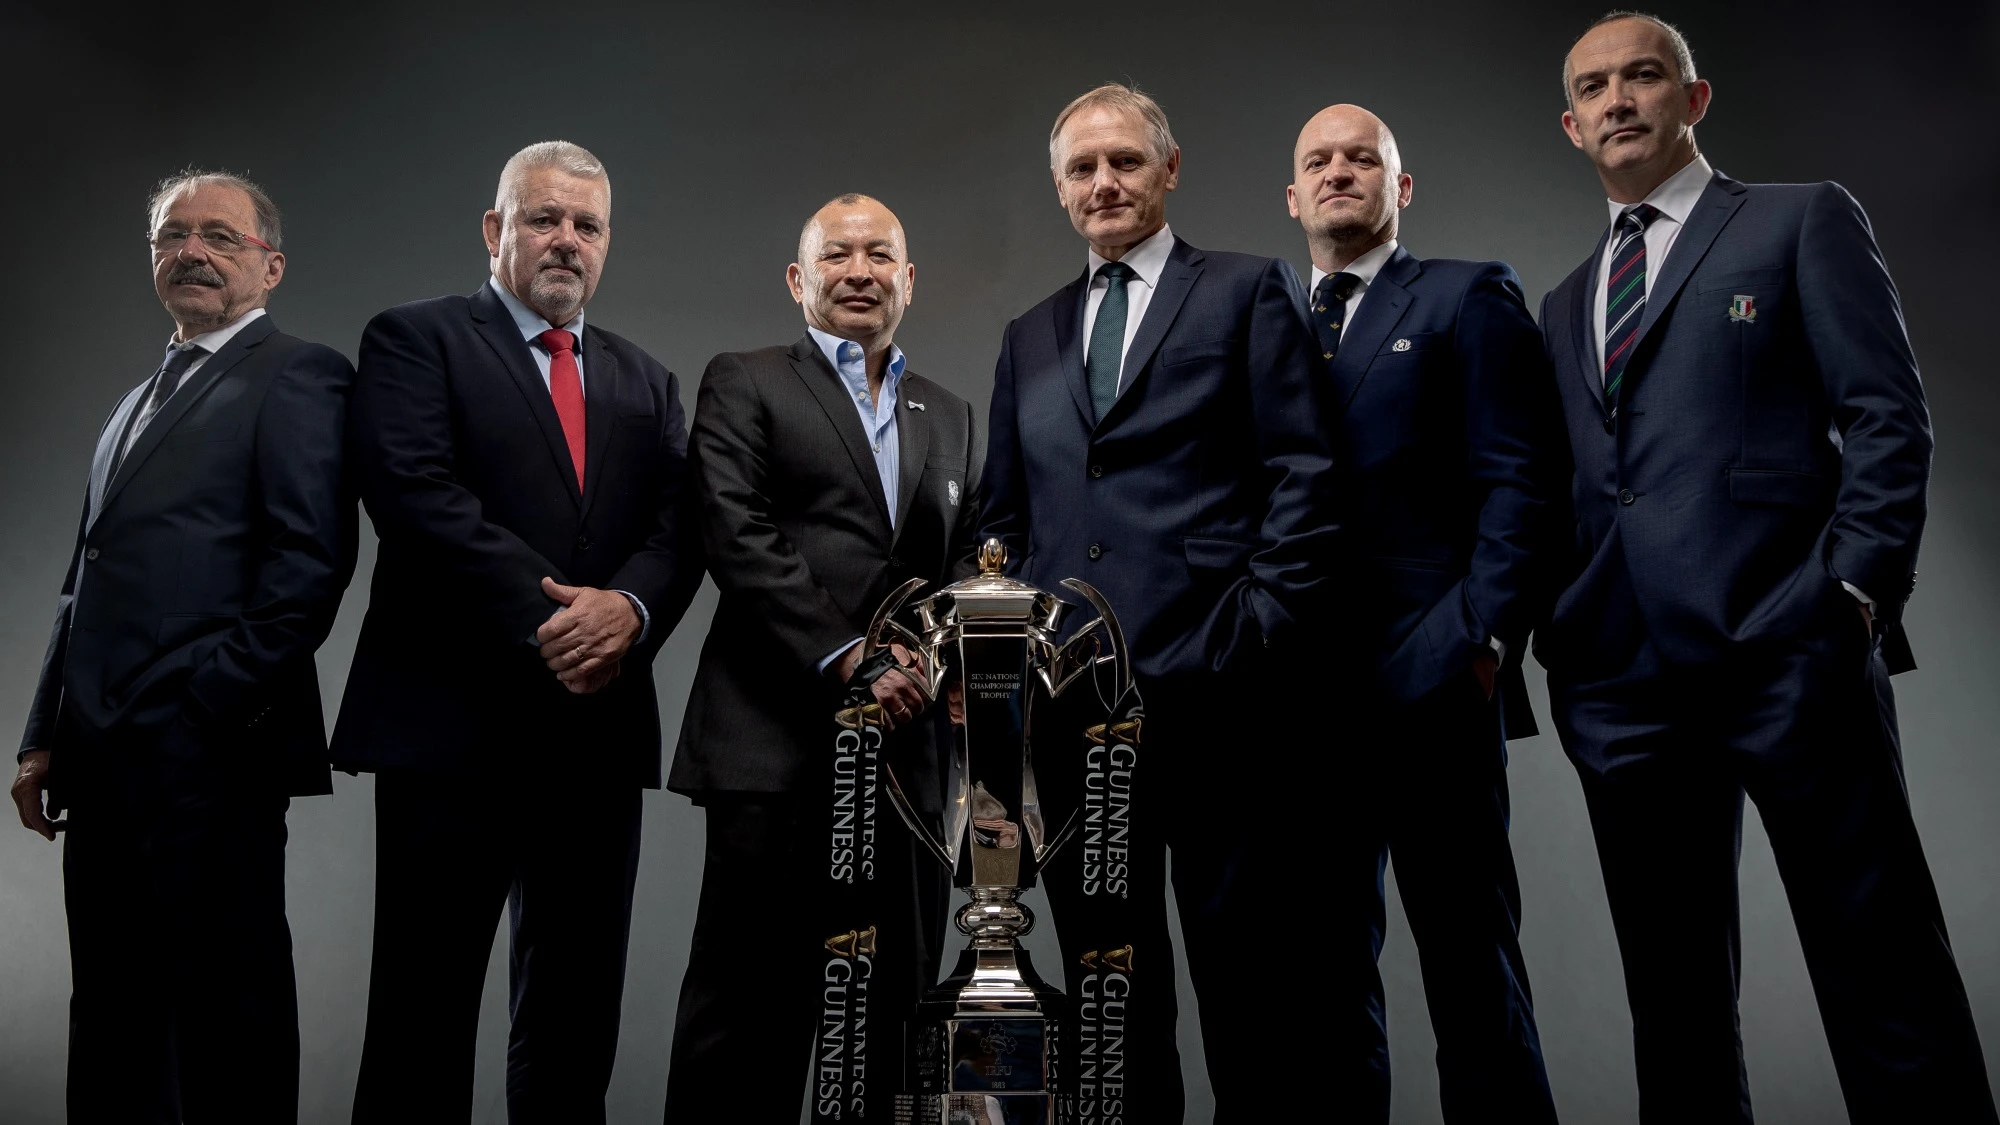 The six coaches of the 2019 Guinness Six Nations